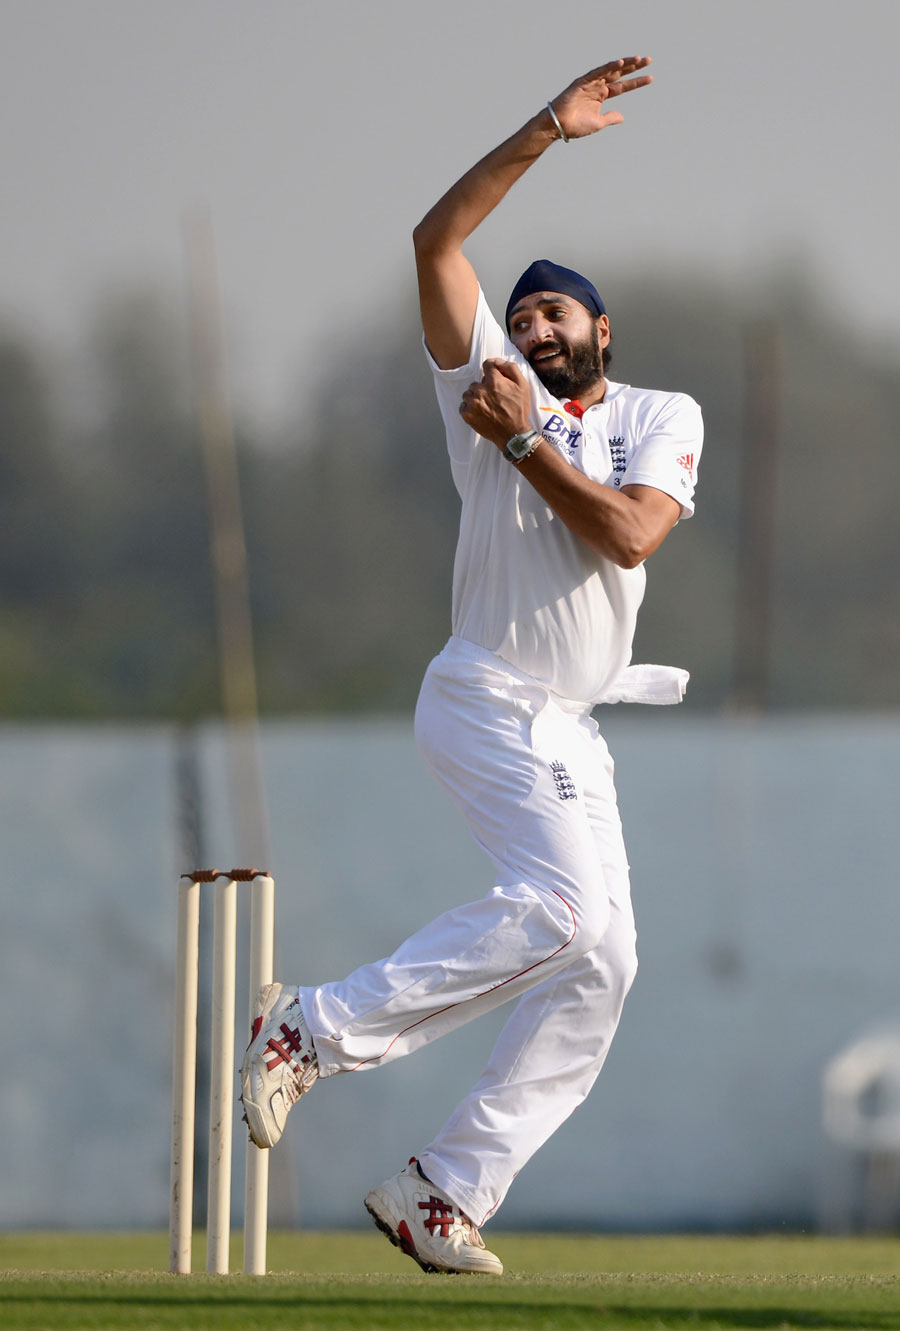 Monty Panesar bowled economically and took a wicket